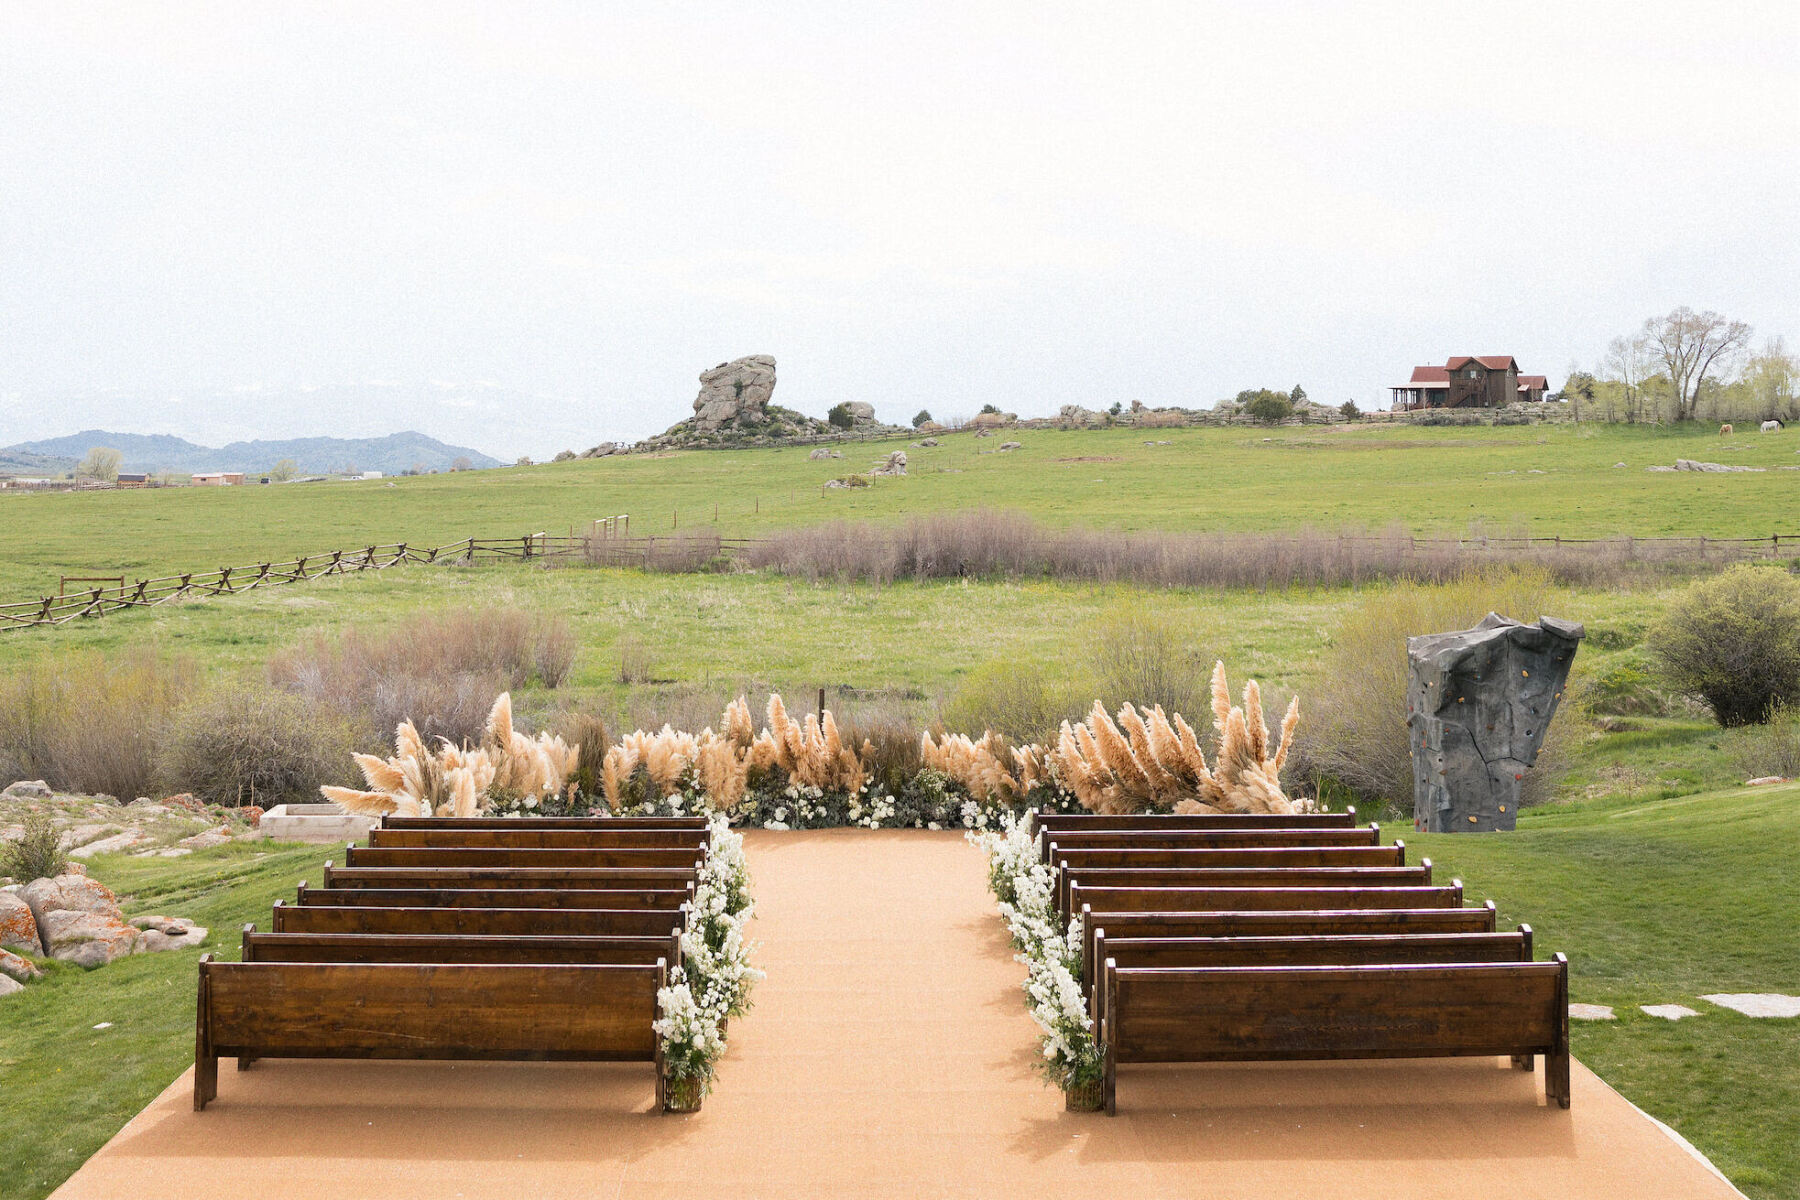 Celebrity Wedding: An outdoor ceremony setup with wooden benches overlooking a grassy area at a ranch in Wyoming.